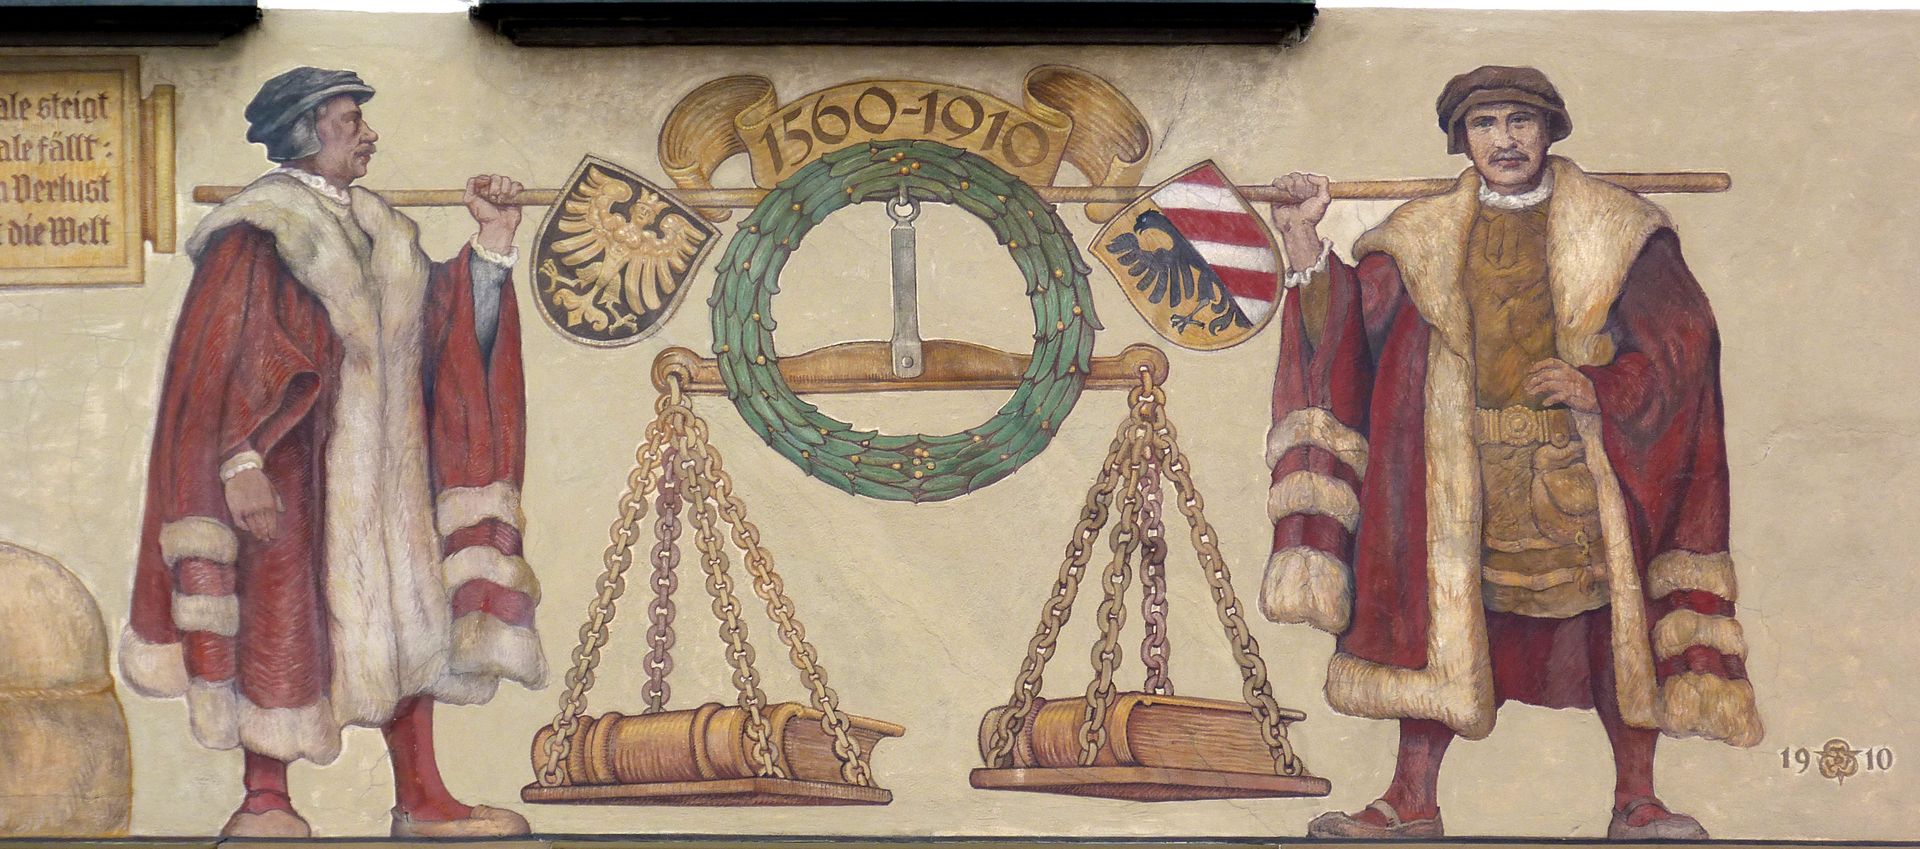 Merchants´ trail South front, bearers of the weighing scale with coat of arms